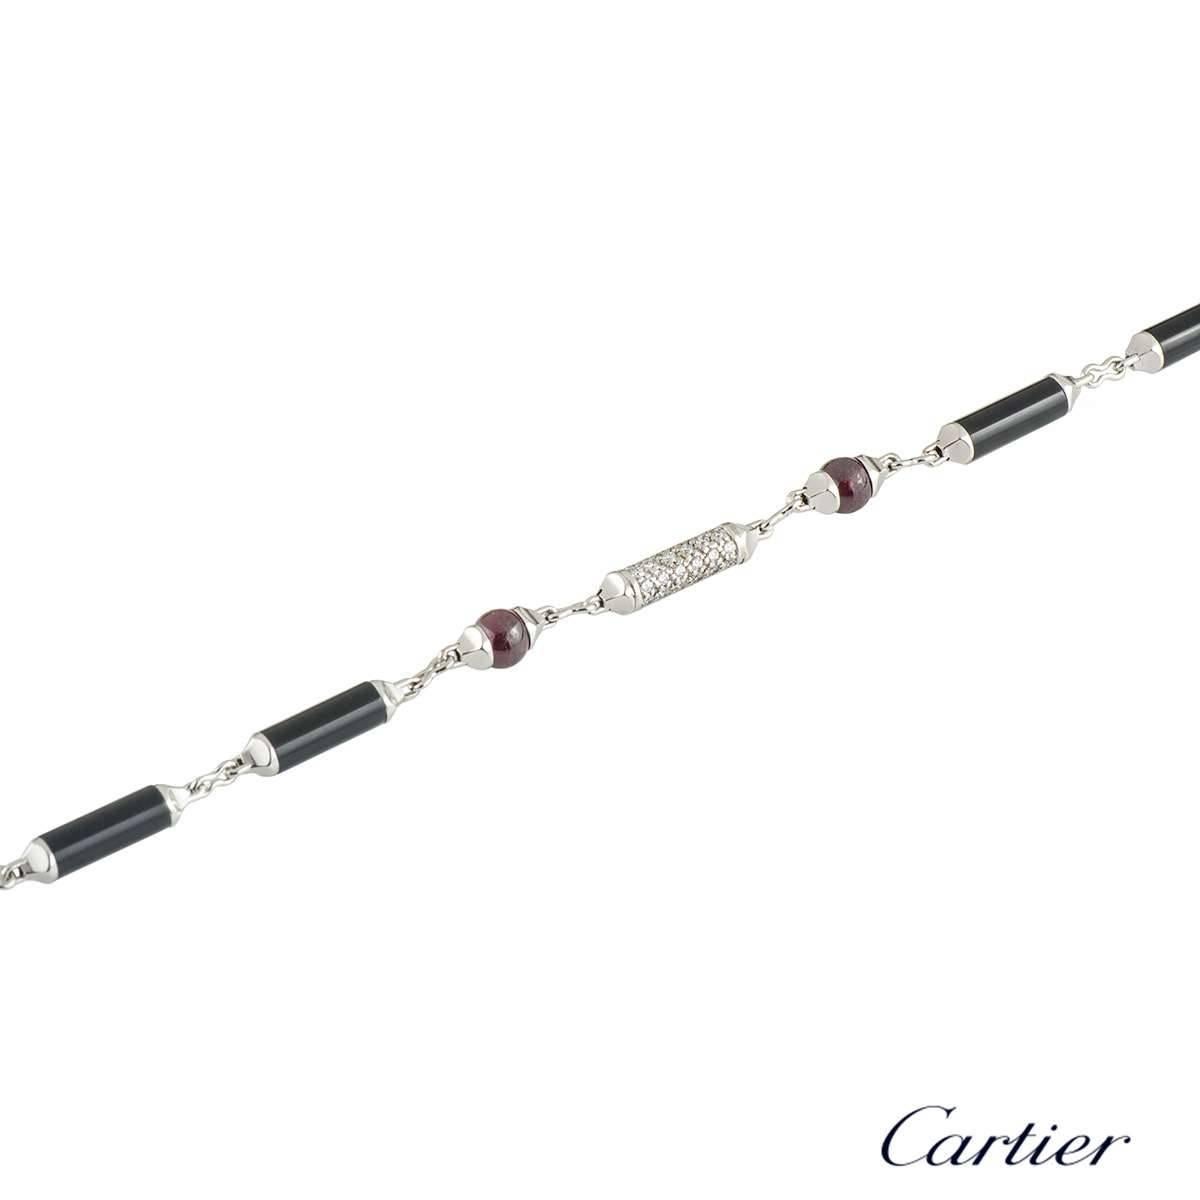 A unique 18k white gold diamond ruby and onyx Cartier bracelet from the Le Baiser Du Dragon collection. The bracelet comprises of  6 cylinder bar motifs, 4 with an onyx inlay and 2 with 79 round brilliant cut diamonds. The diamonds have a total